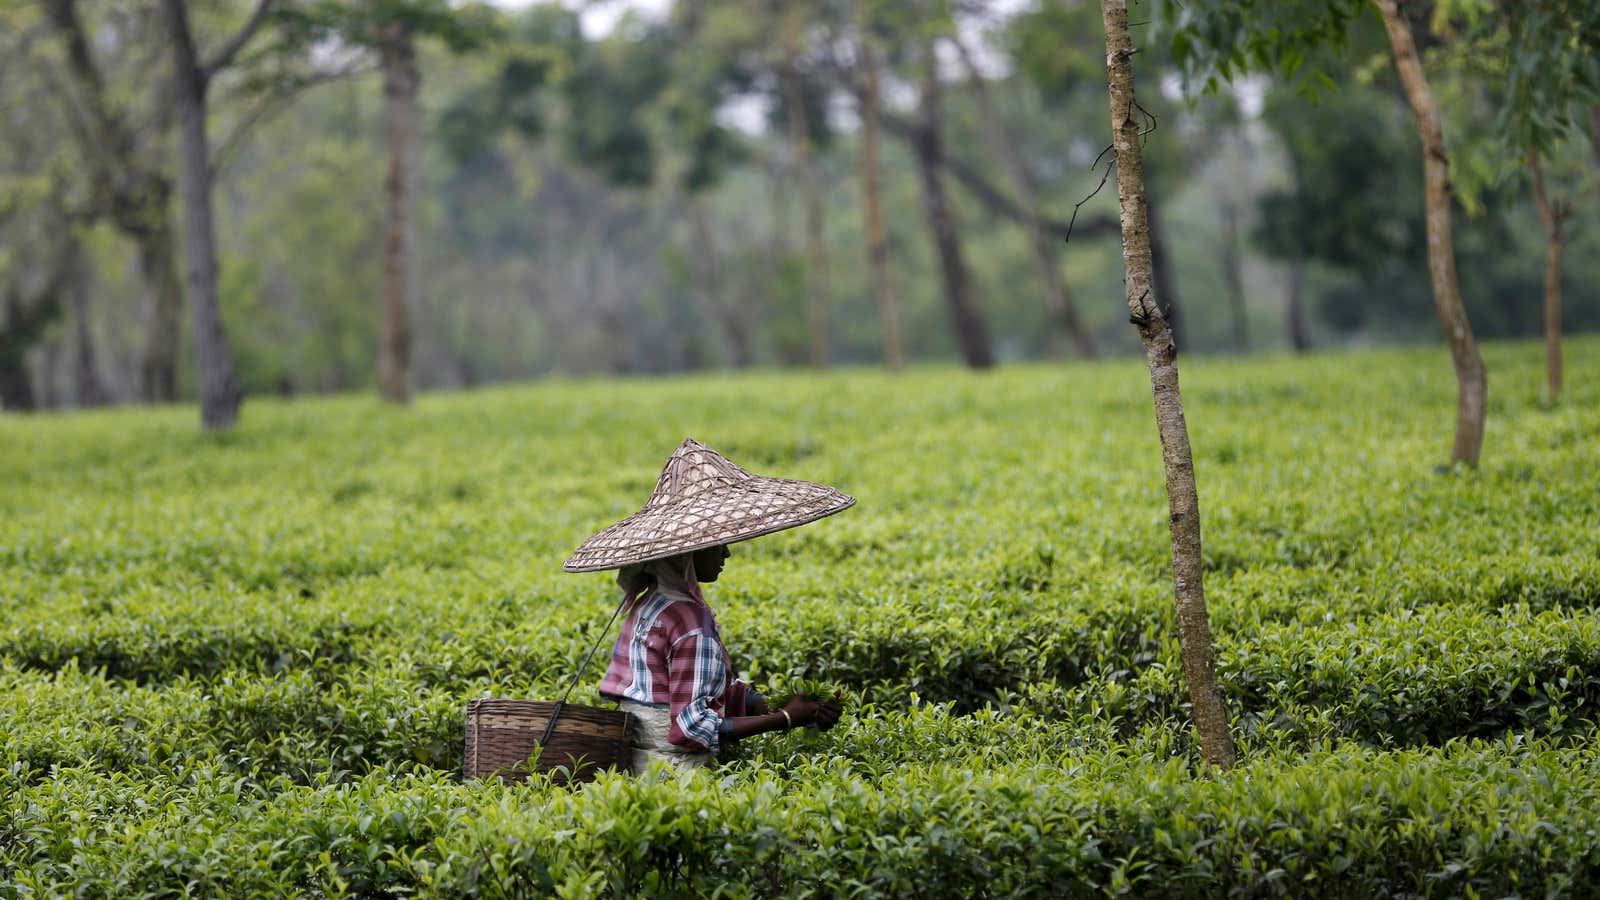 Starbucks and Unilever are sourcing tea from plantations linked to rights abuse